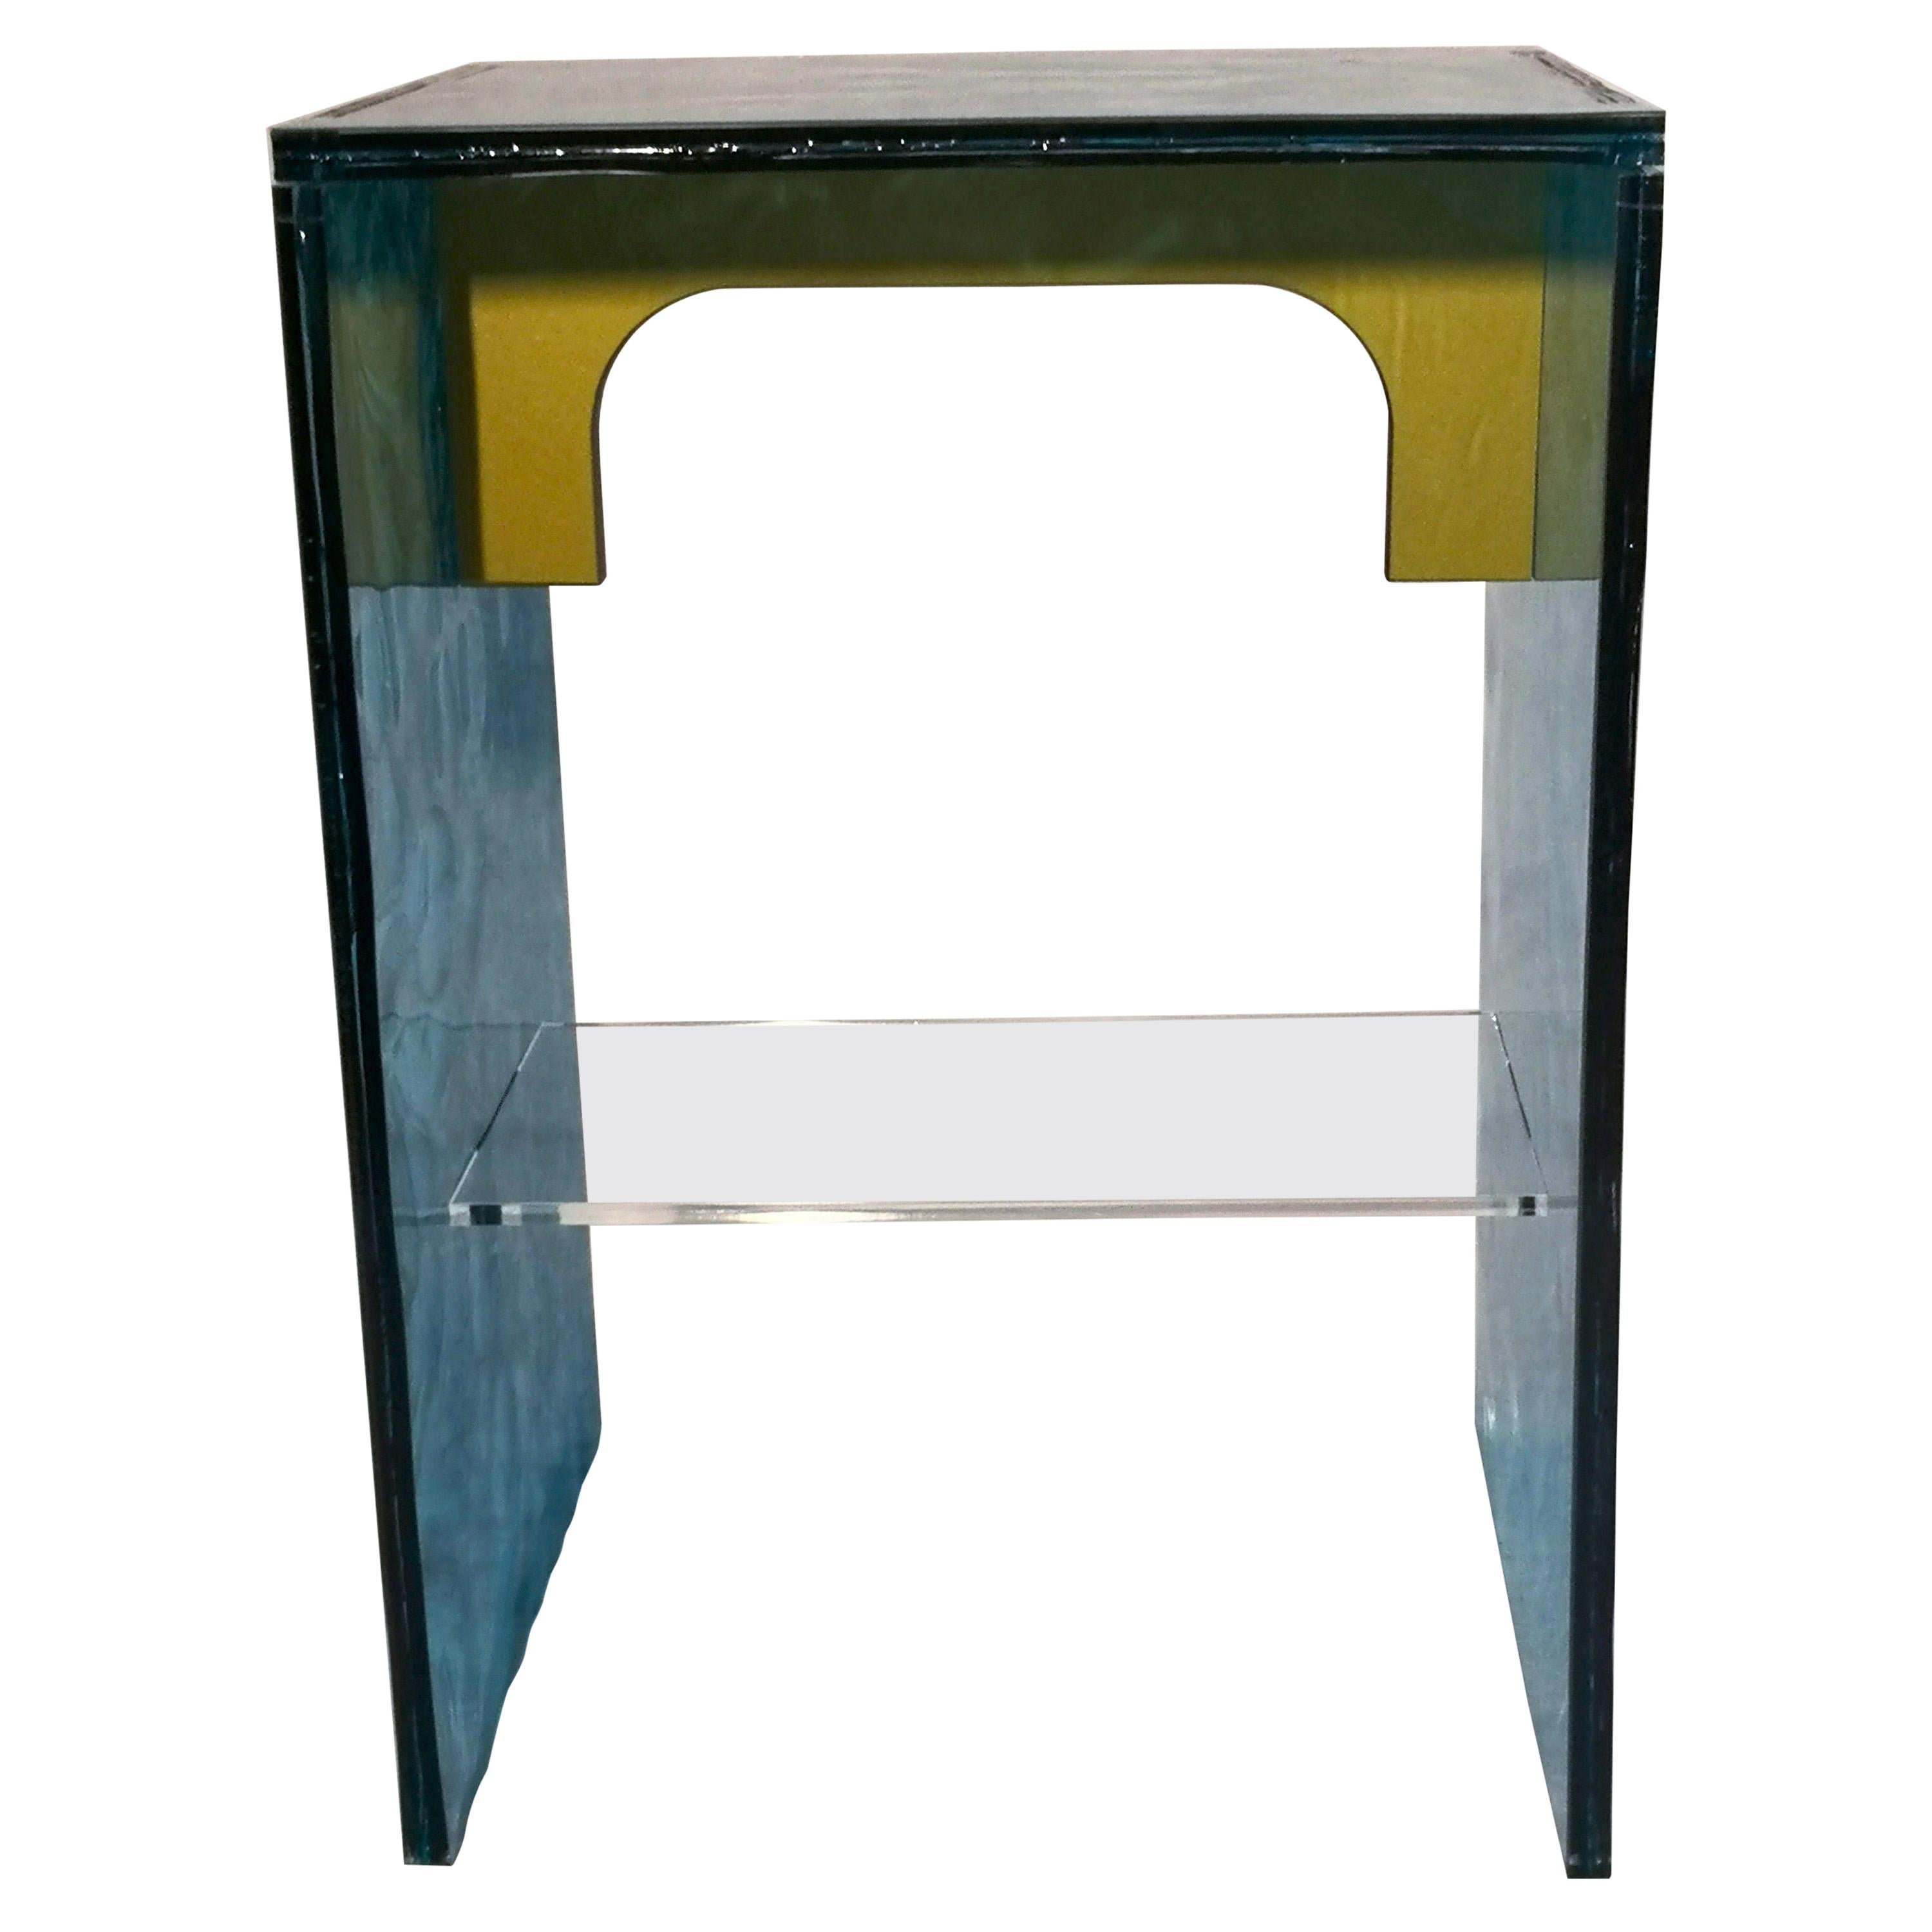 Sketch Quadro Side Table 2 Made of Green Acrylic Des. Roberto Giacomucci in 2020